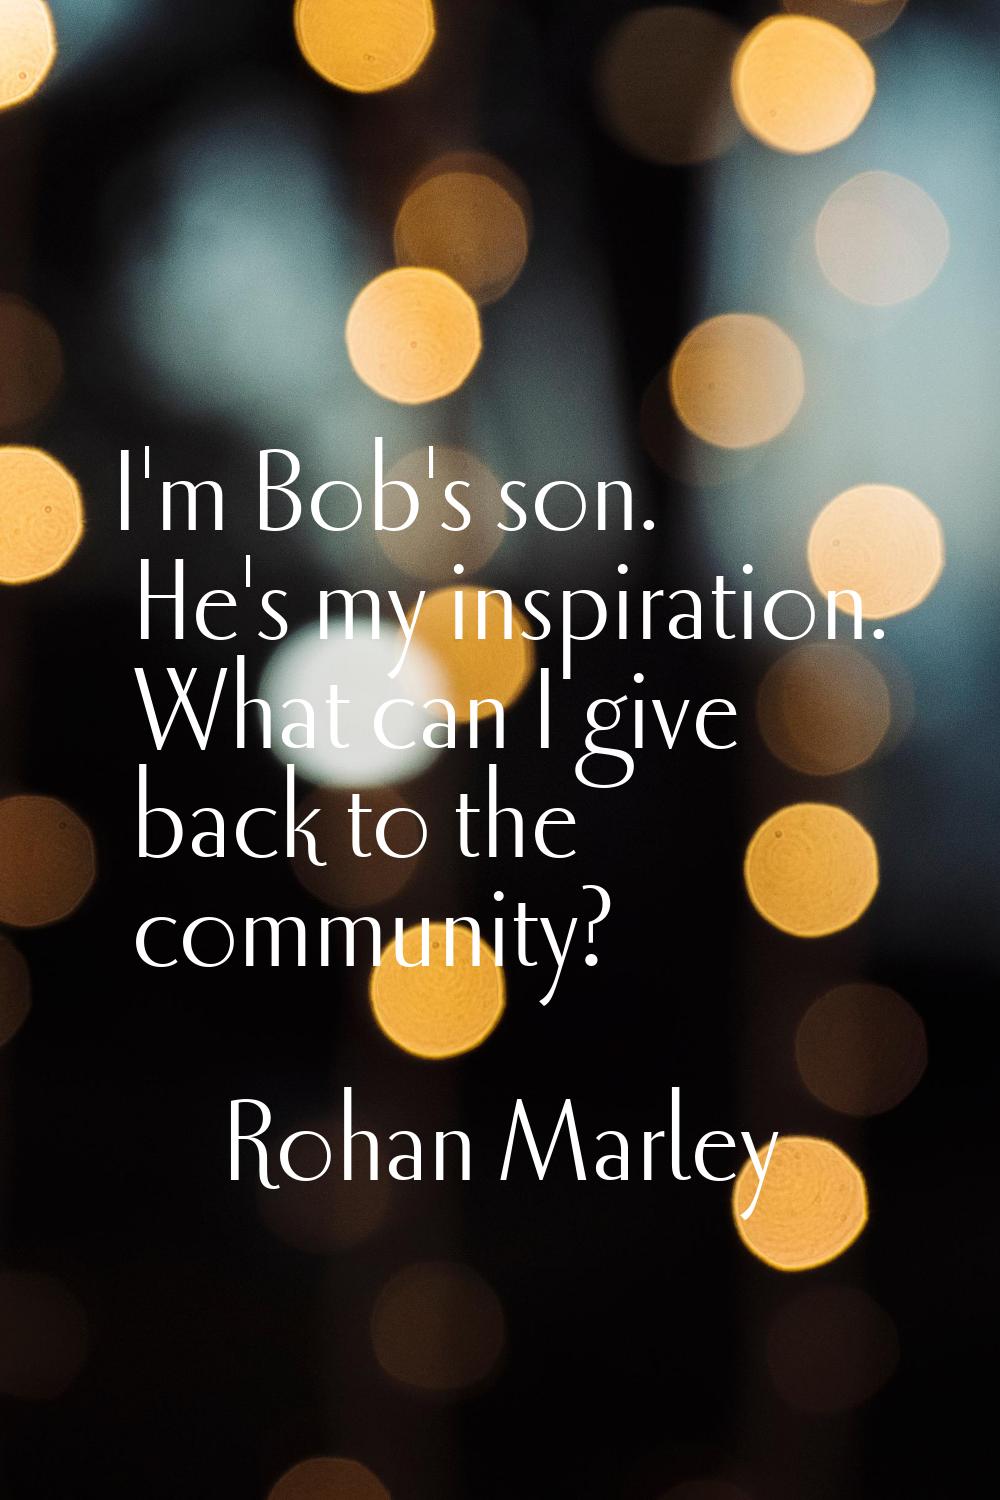 I'm Bob's son. He's my inspiration. What can I give back to the community?